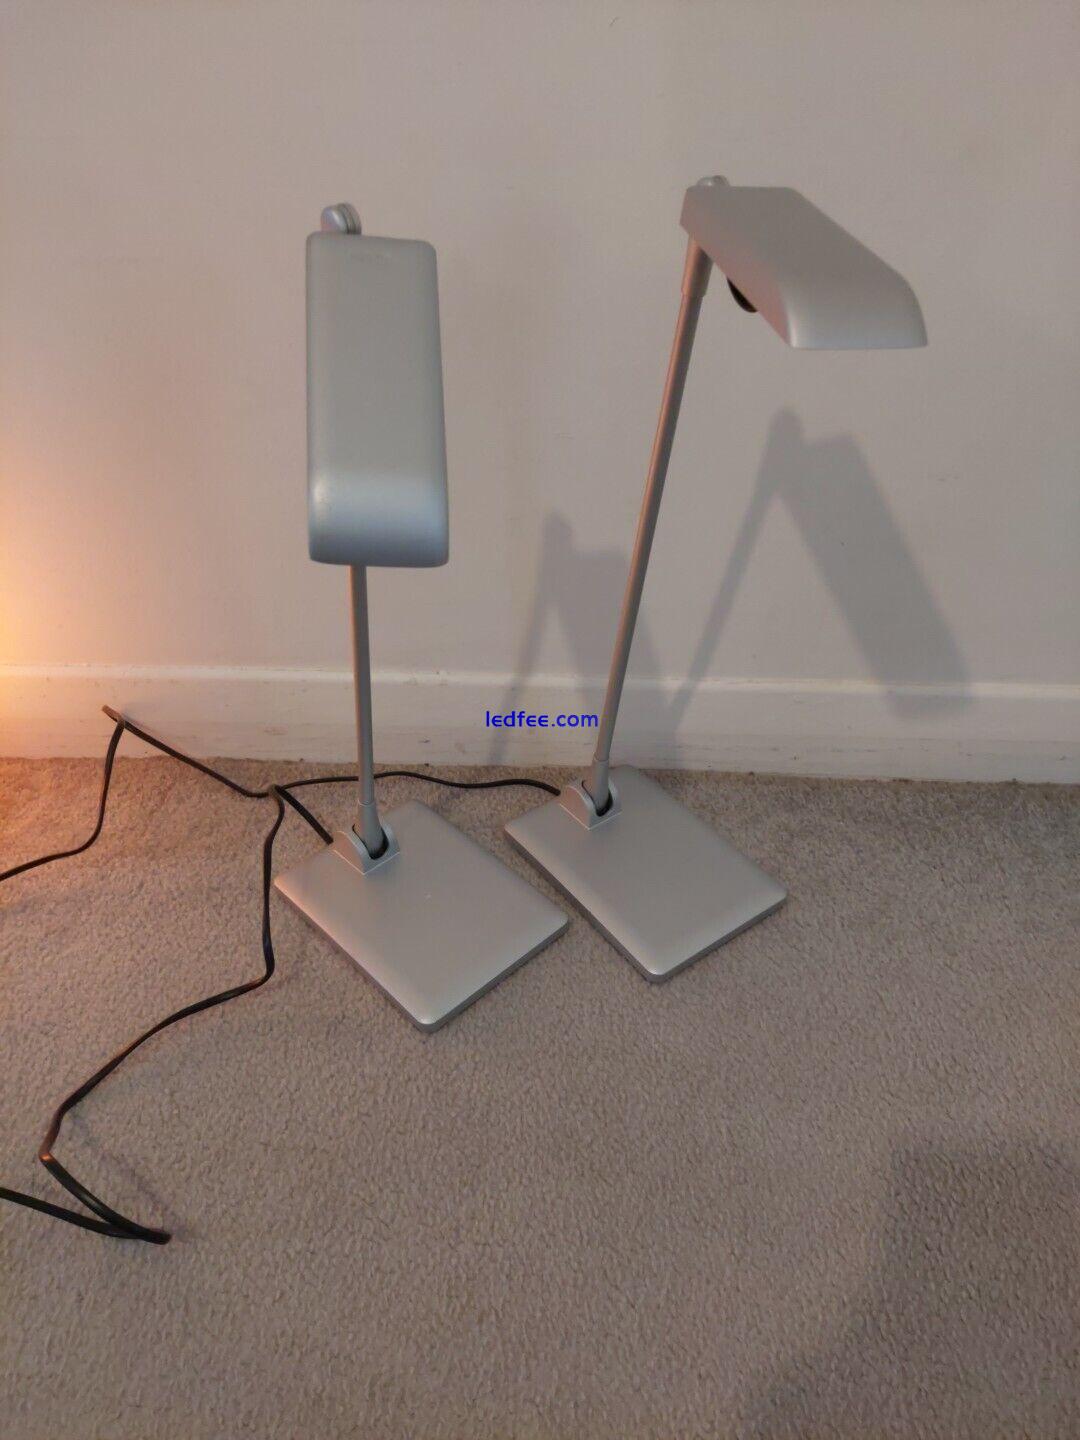 Pair of LUXO LED table Lamps. Adjustable  Heads. 5 